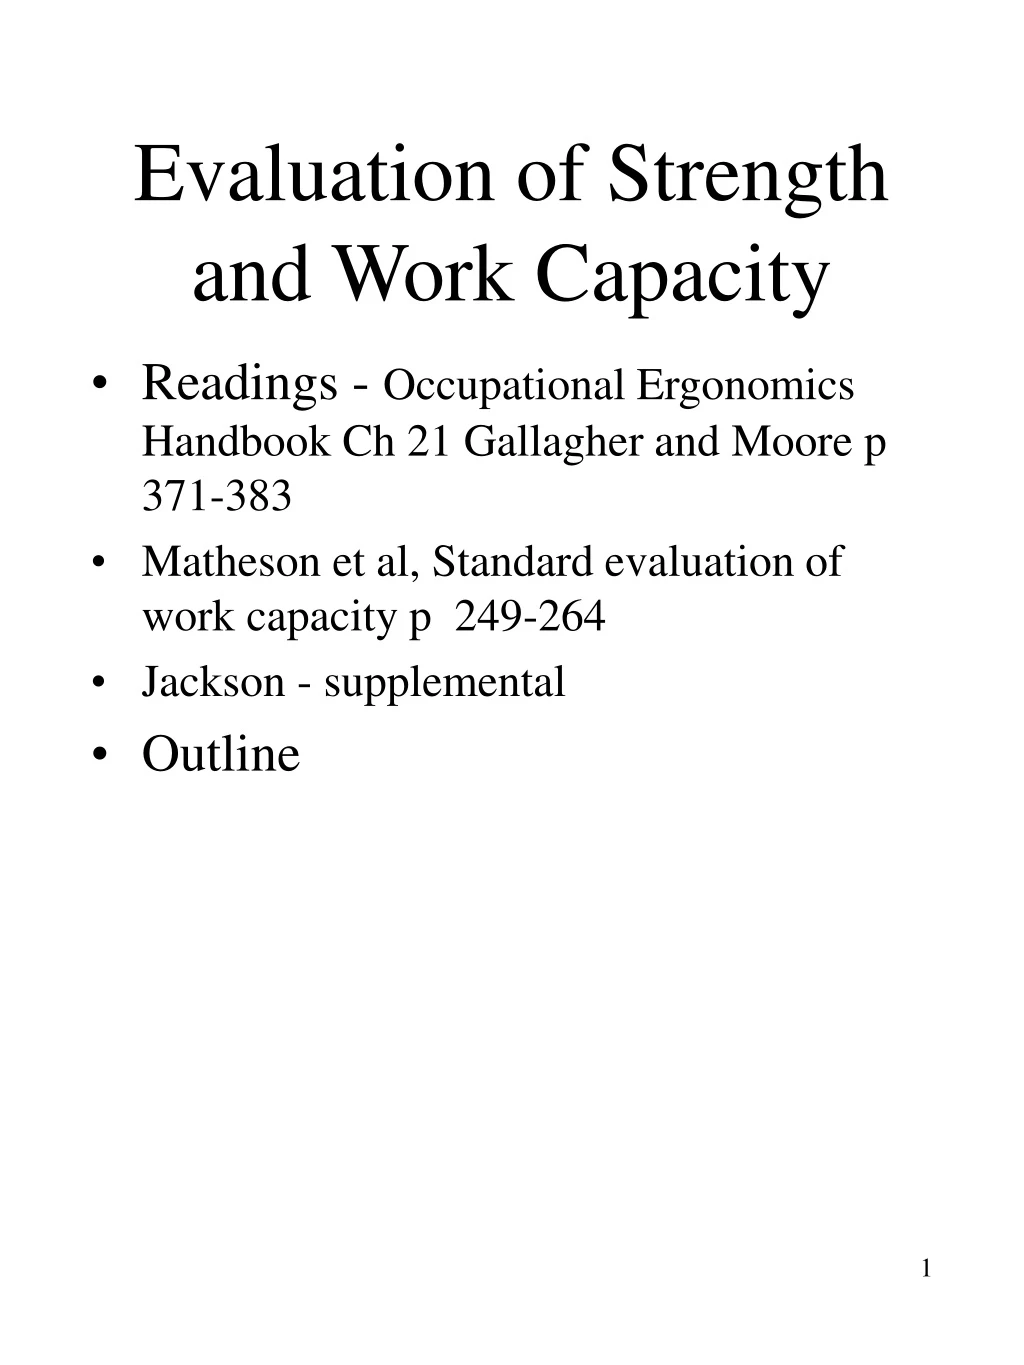 evaluation of strength and work capacity